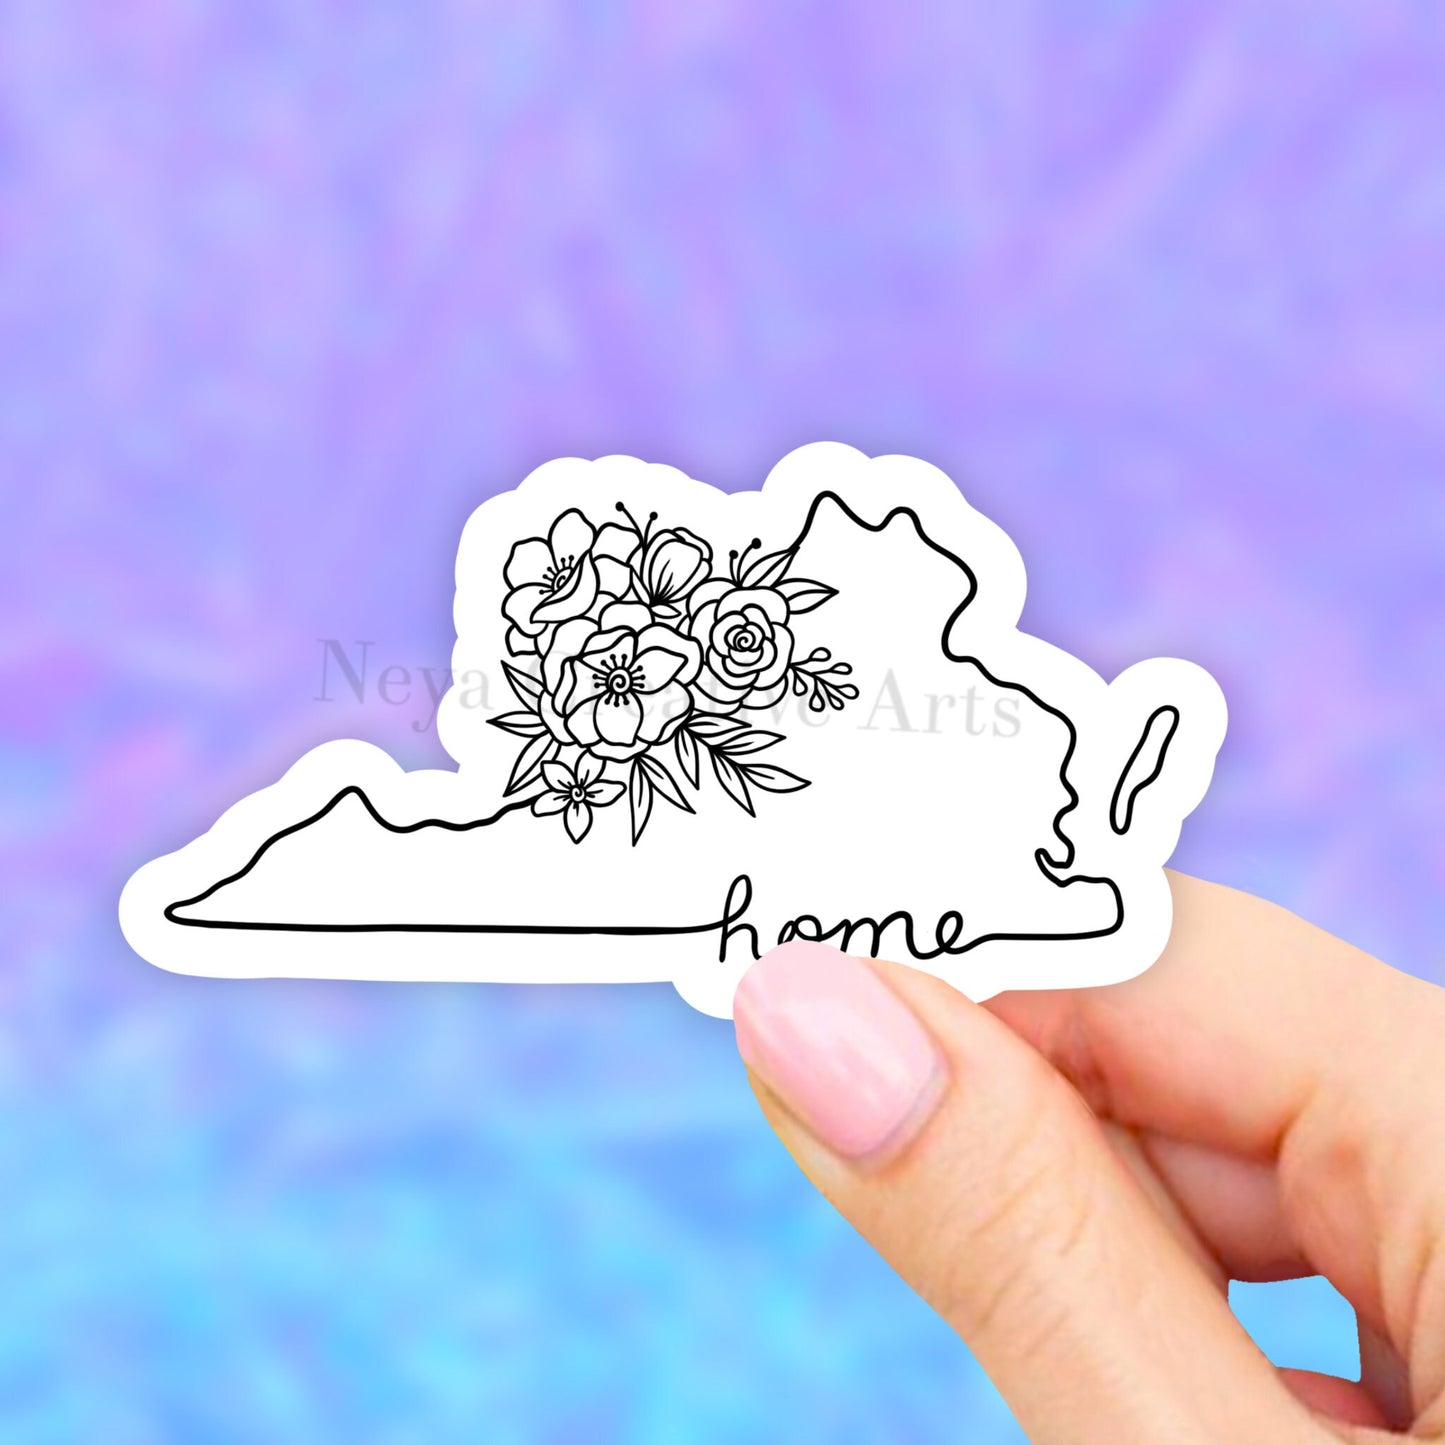 Virginia State Sticker, Floral States Map, water bottle stickers, state stickers, USA State Art, USA Map Car Decal, Laptop, waterproof